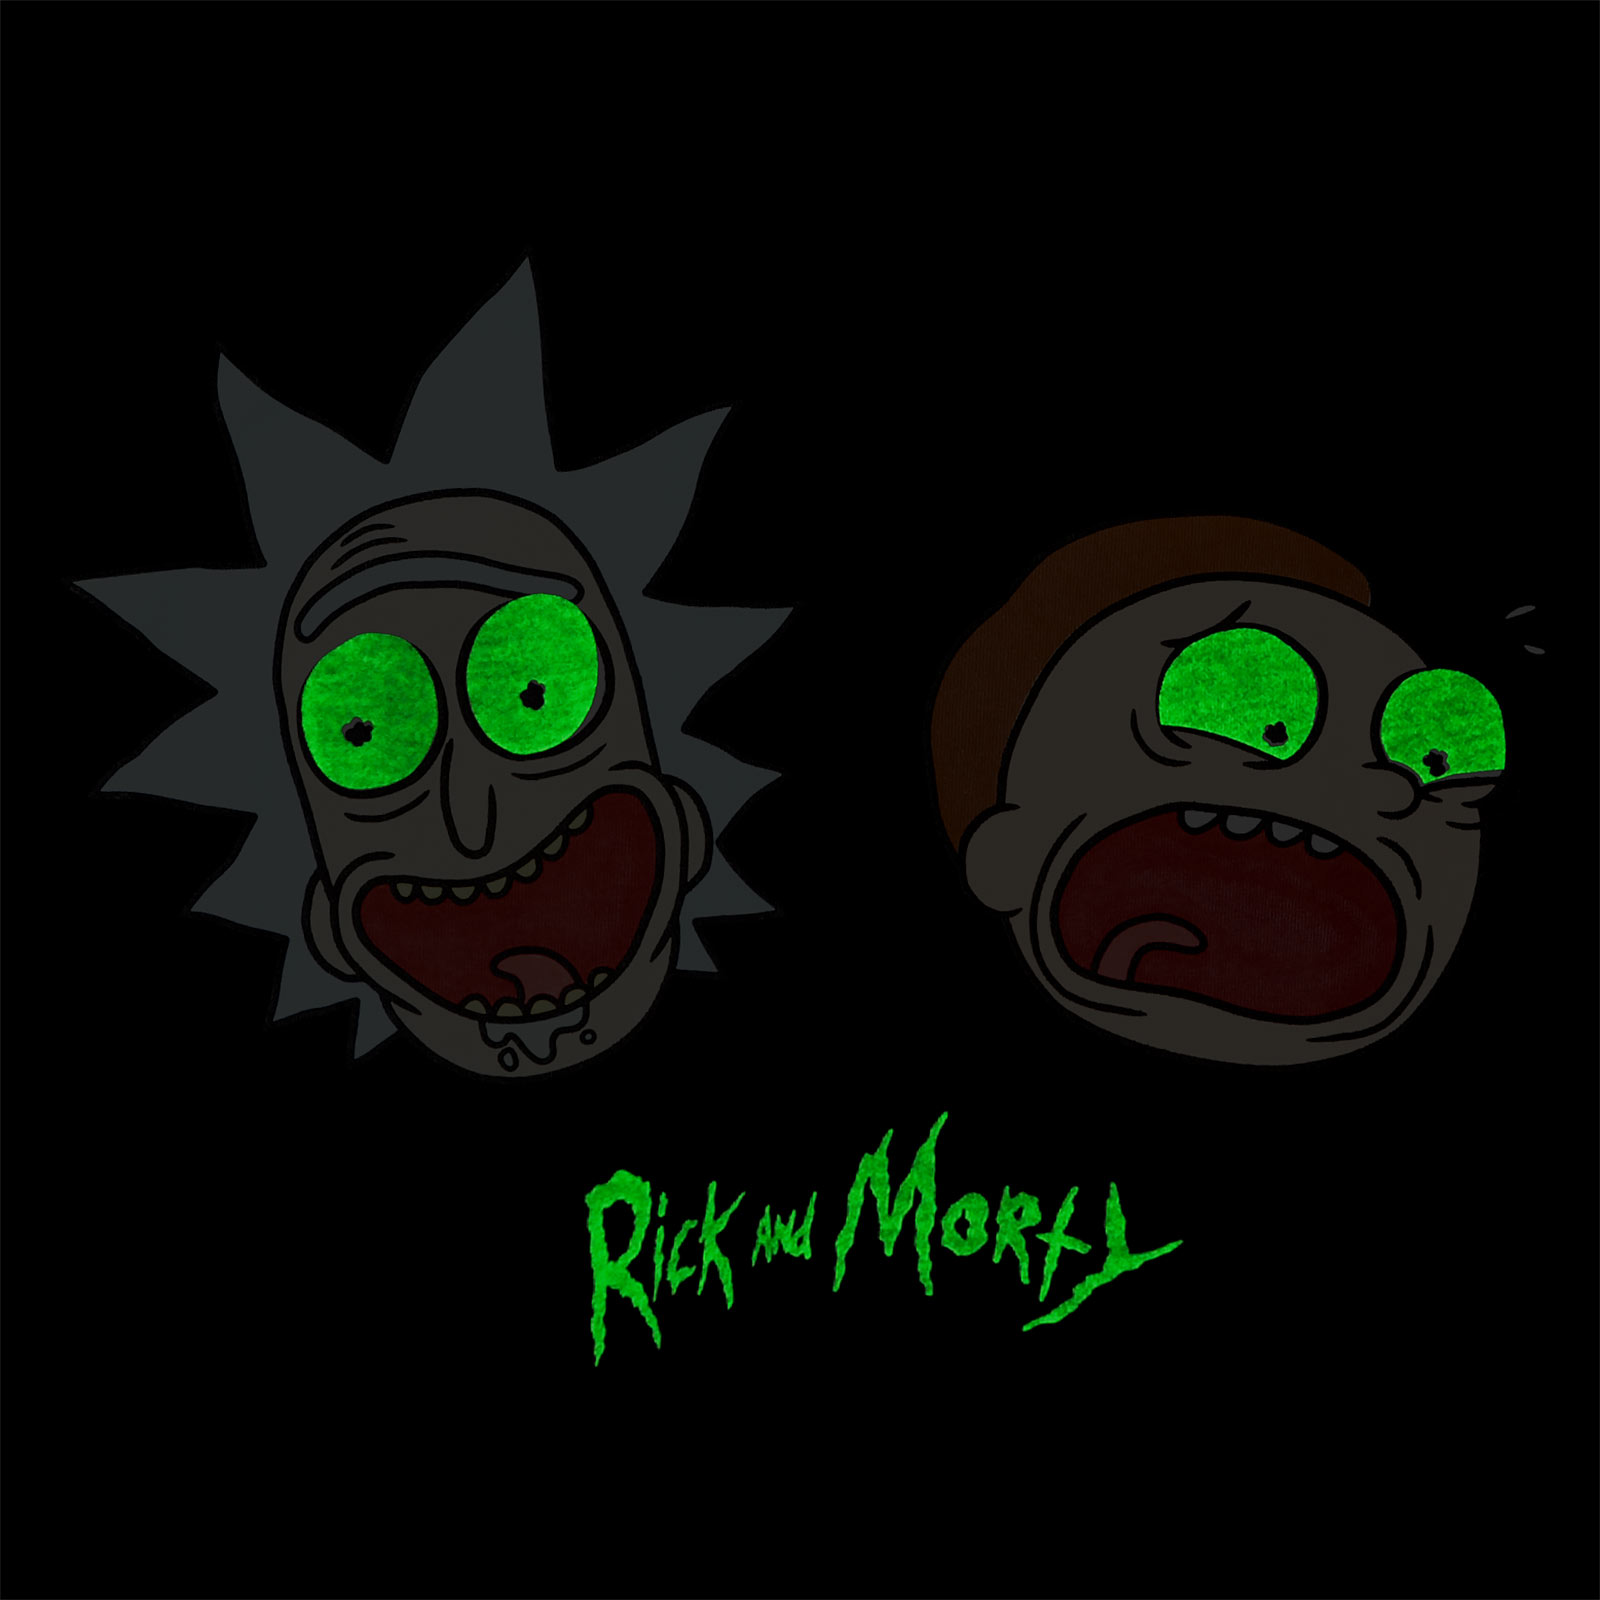 Rick et Morty - T-shirt Crazy Faces Glow in the Dark